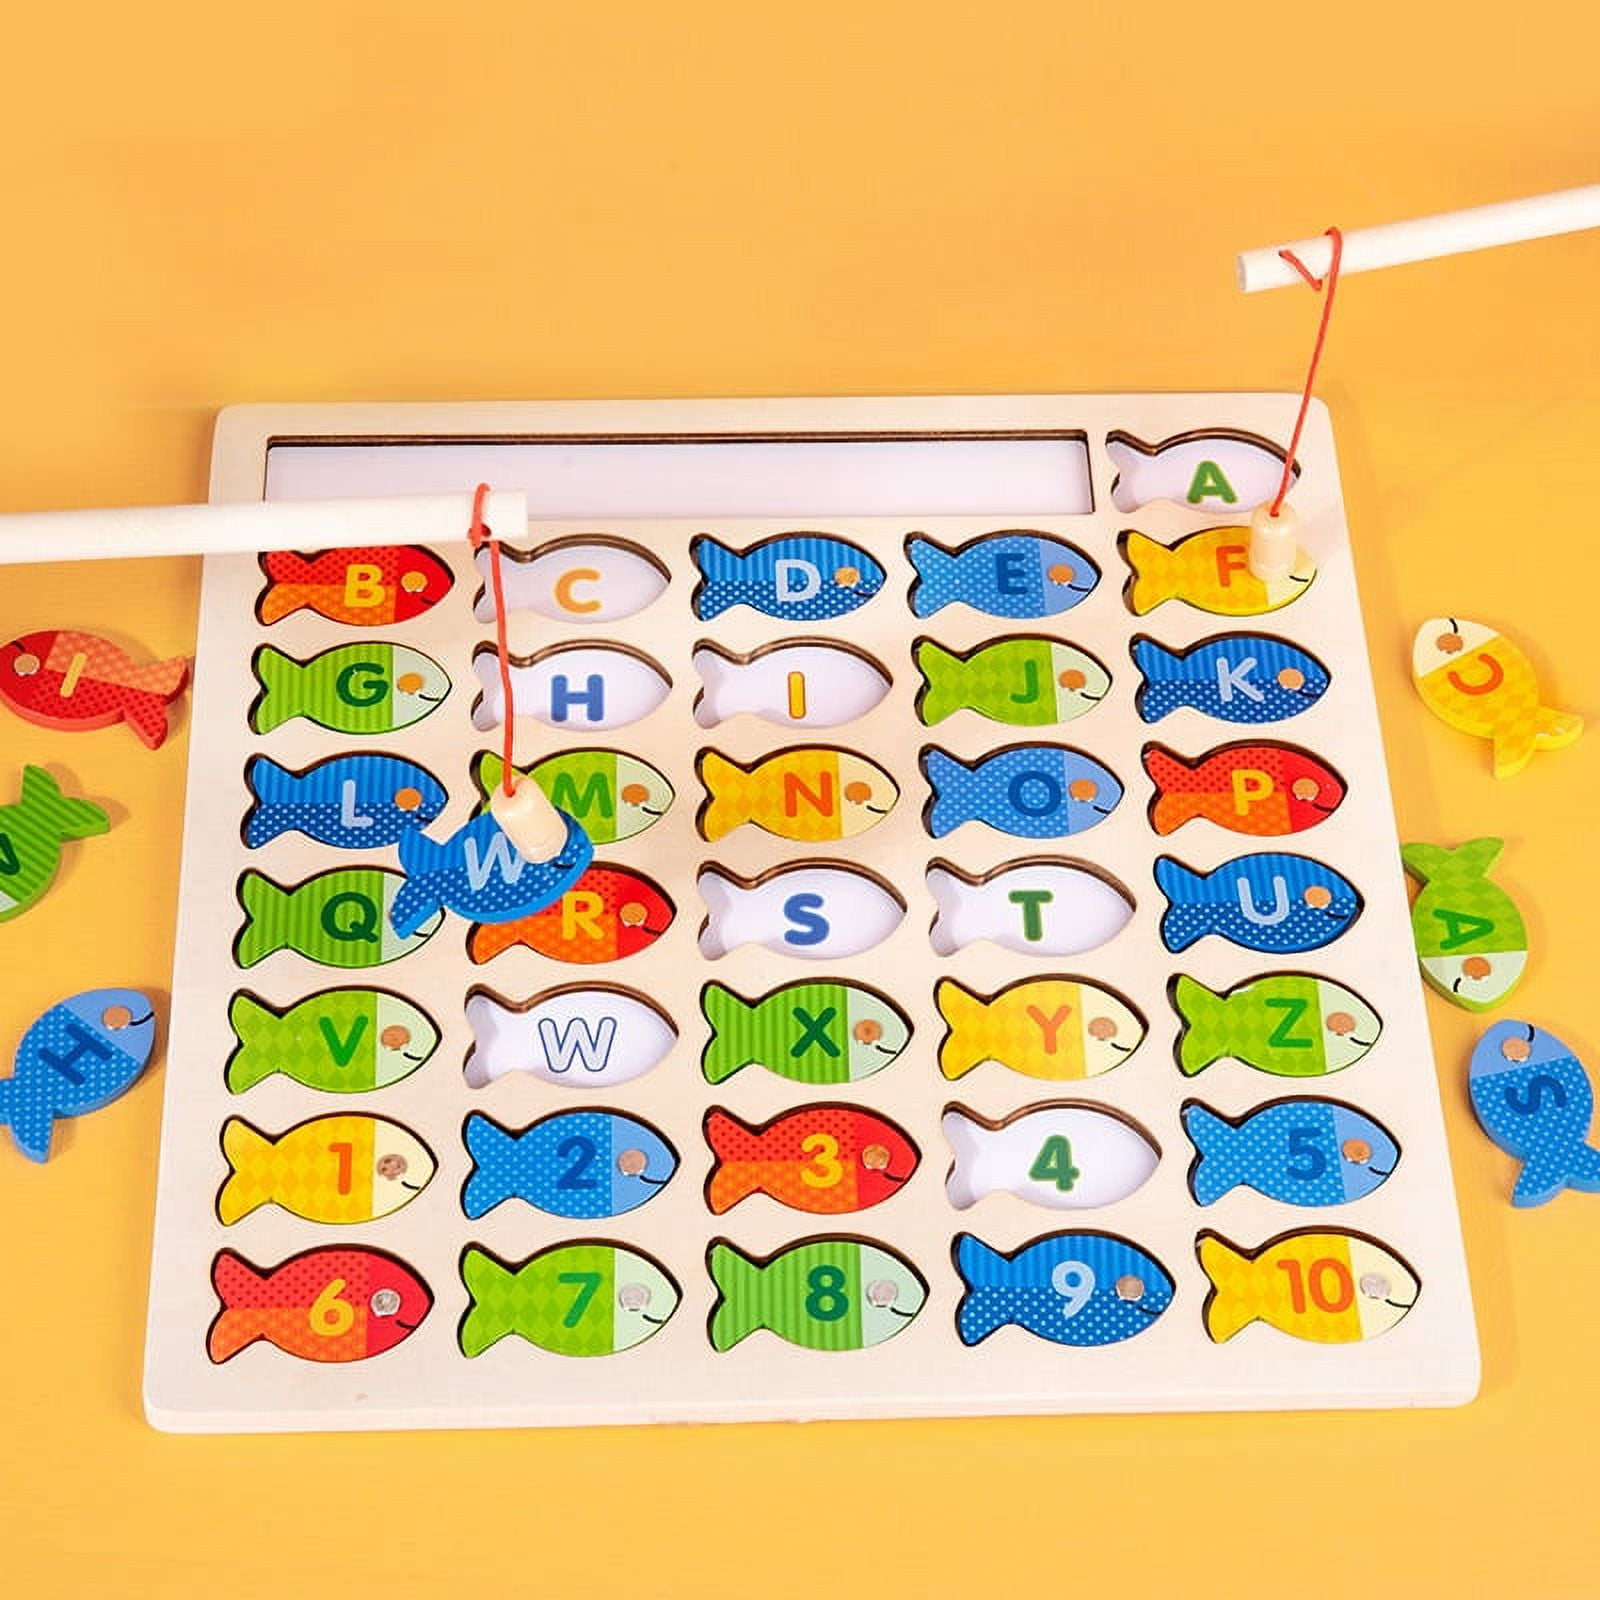  WOODMAM Wooden Magnetic Fishing Game, Montessori Preschool  Alphabet Puzzle ABC Learning Educational Toys with Word Cards, Letters and  Numbers Fish Catching for 3 4 5 Year Old Toddlers Gifts : Toys & Games